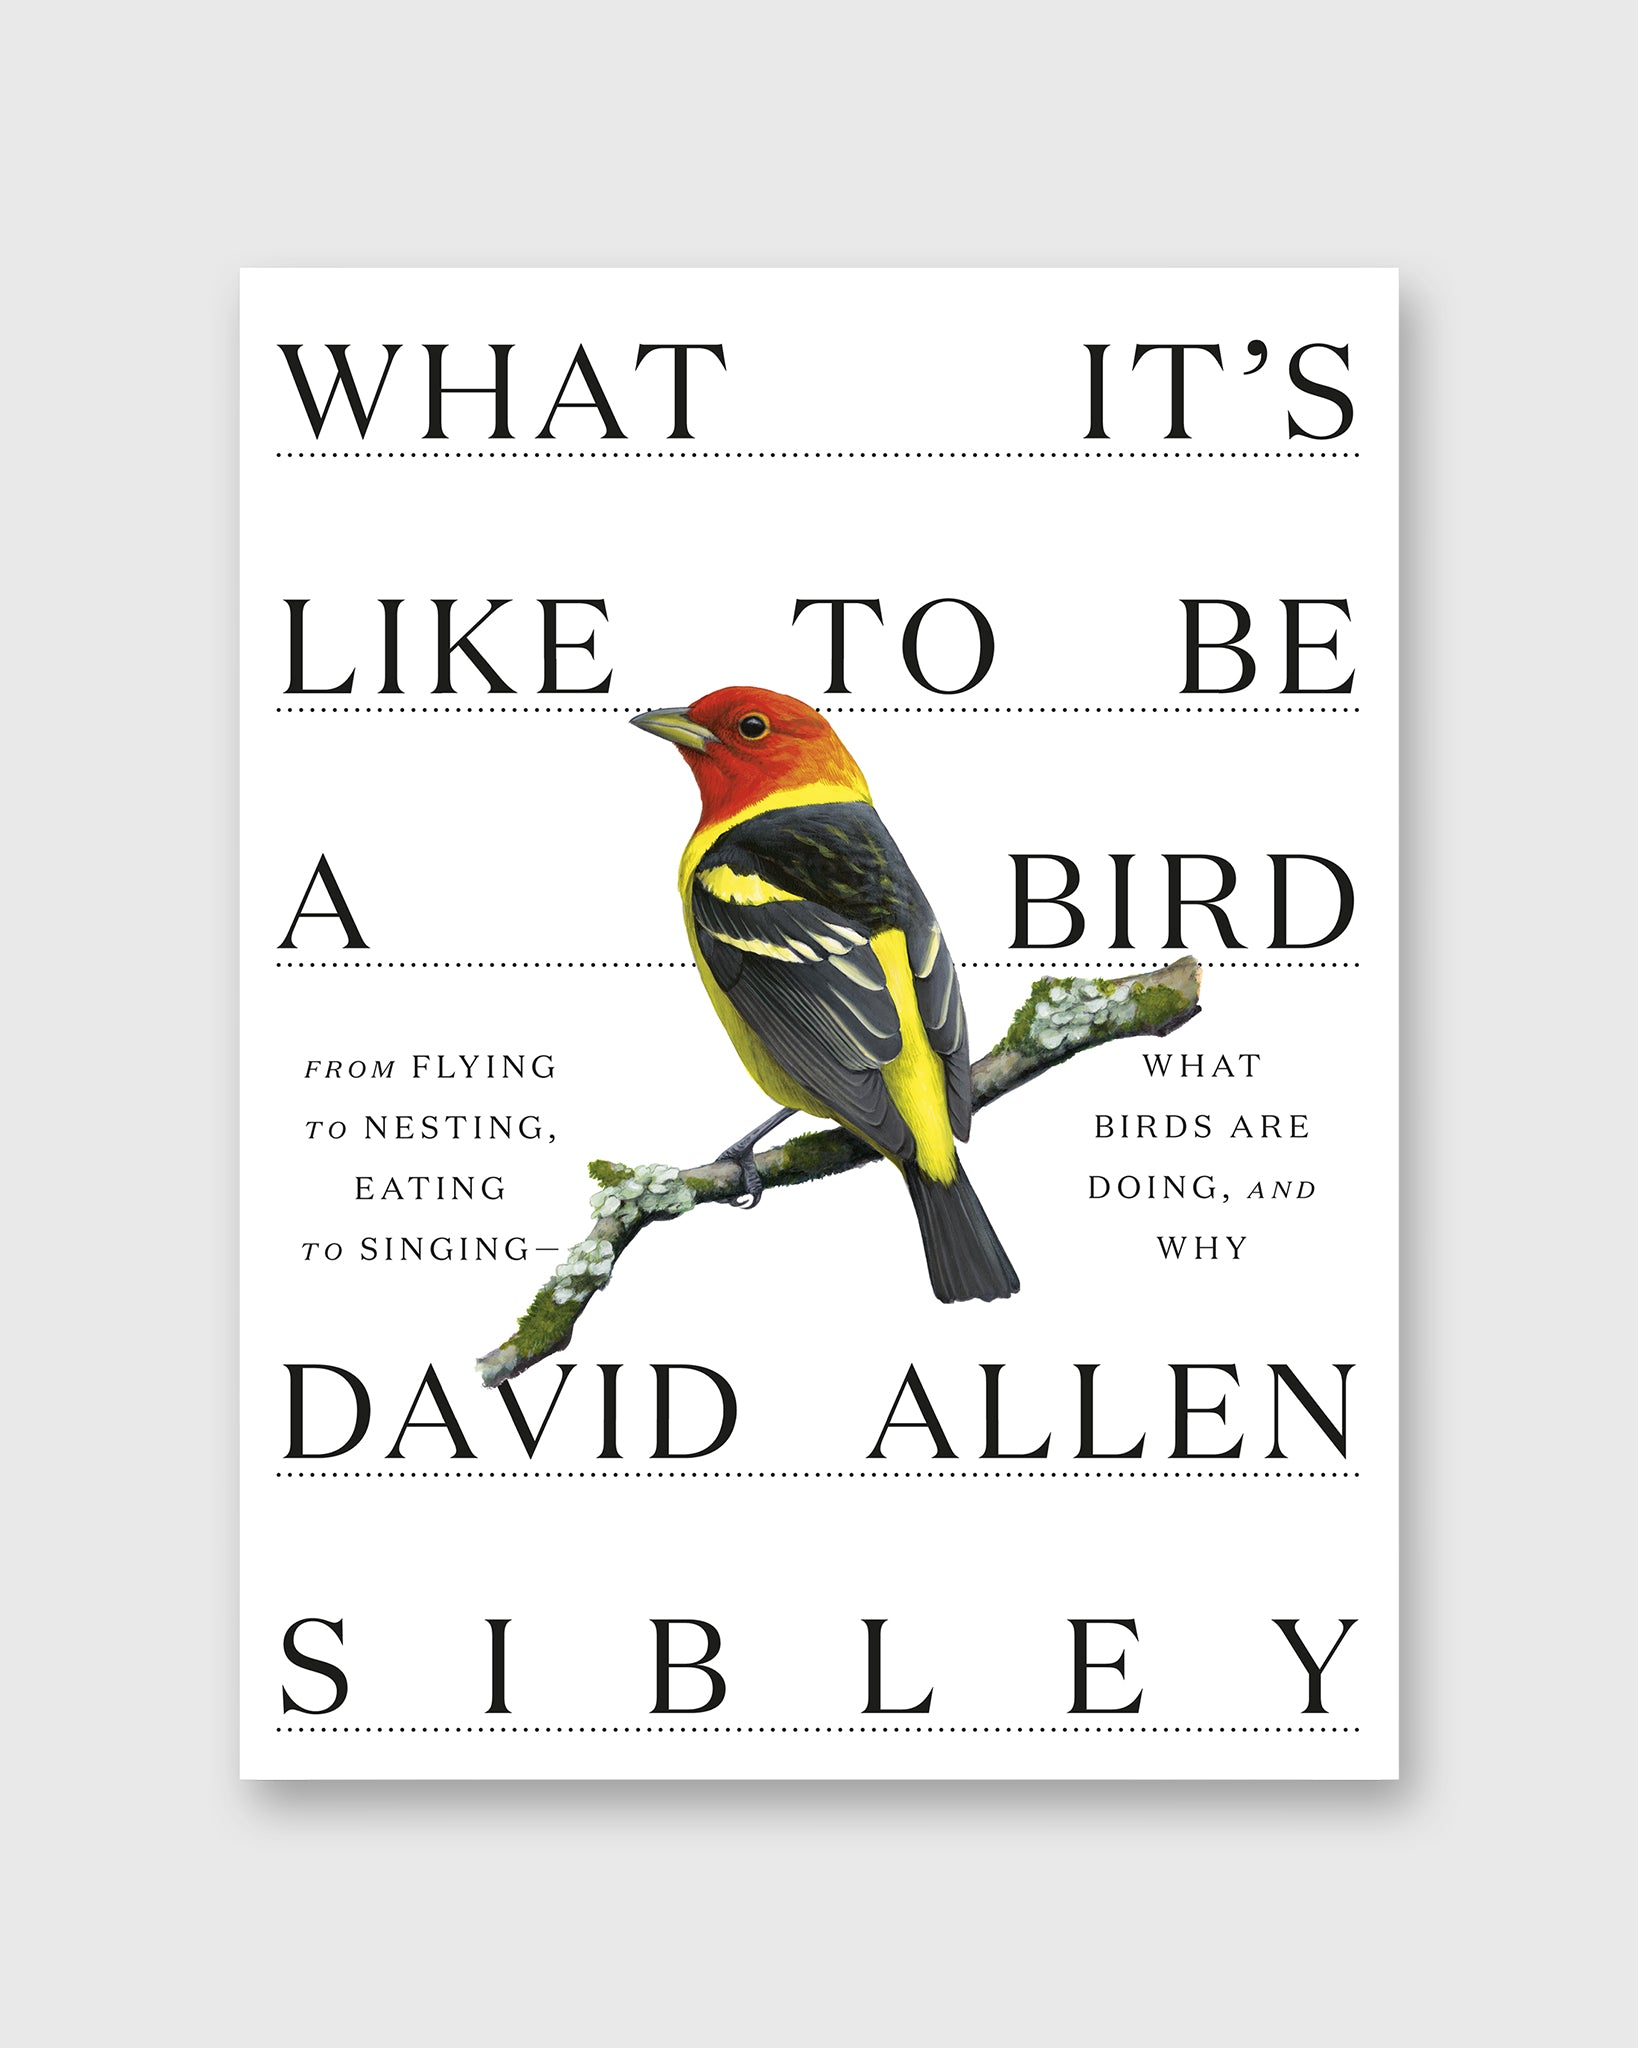 What It's Like to Be a Bird - David Allen Sibley